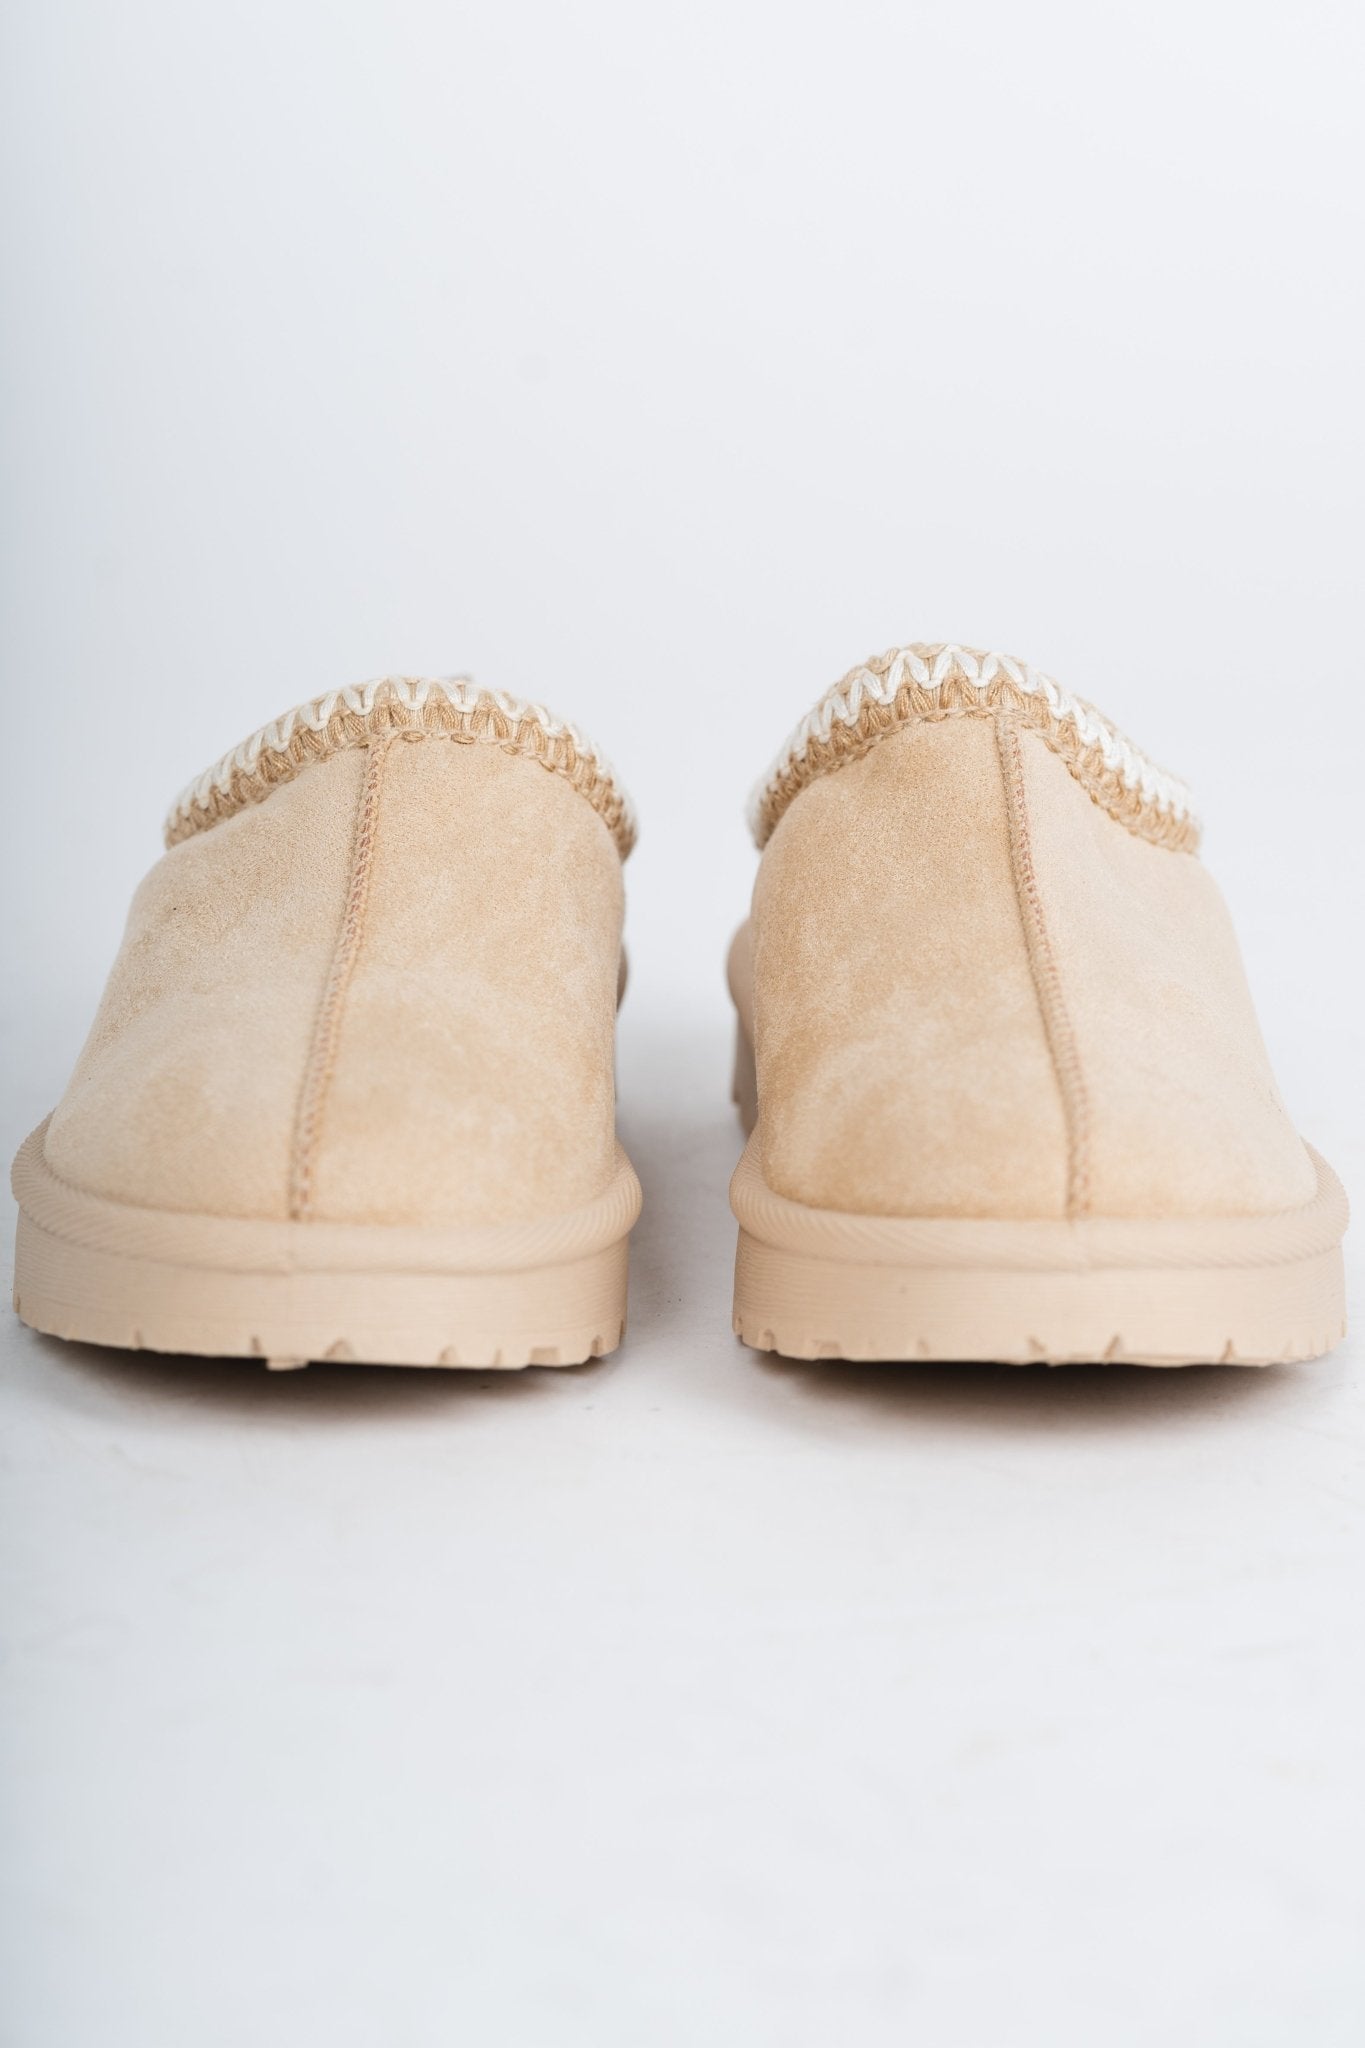 Zen stitched slippers natural - Trendy shoes - Fashion Shoes at Lush Fashion Lounge Boutique in Oklahoma City